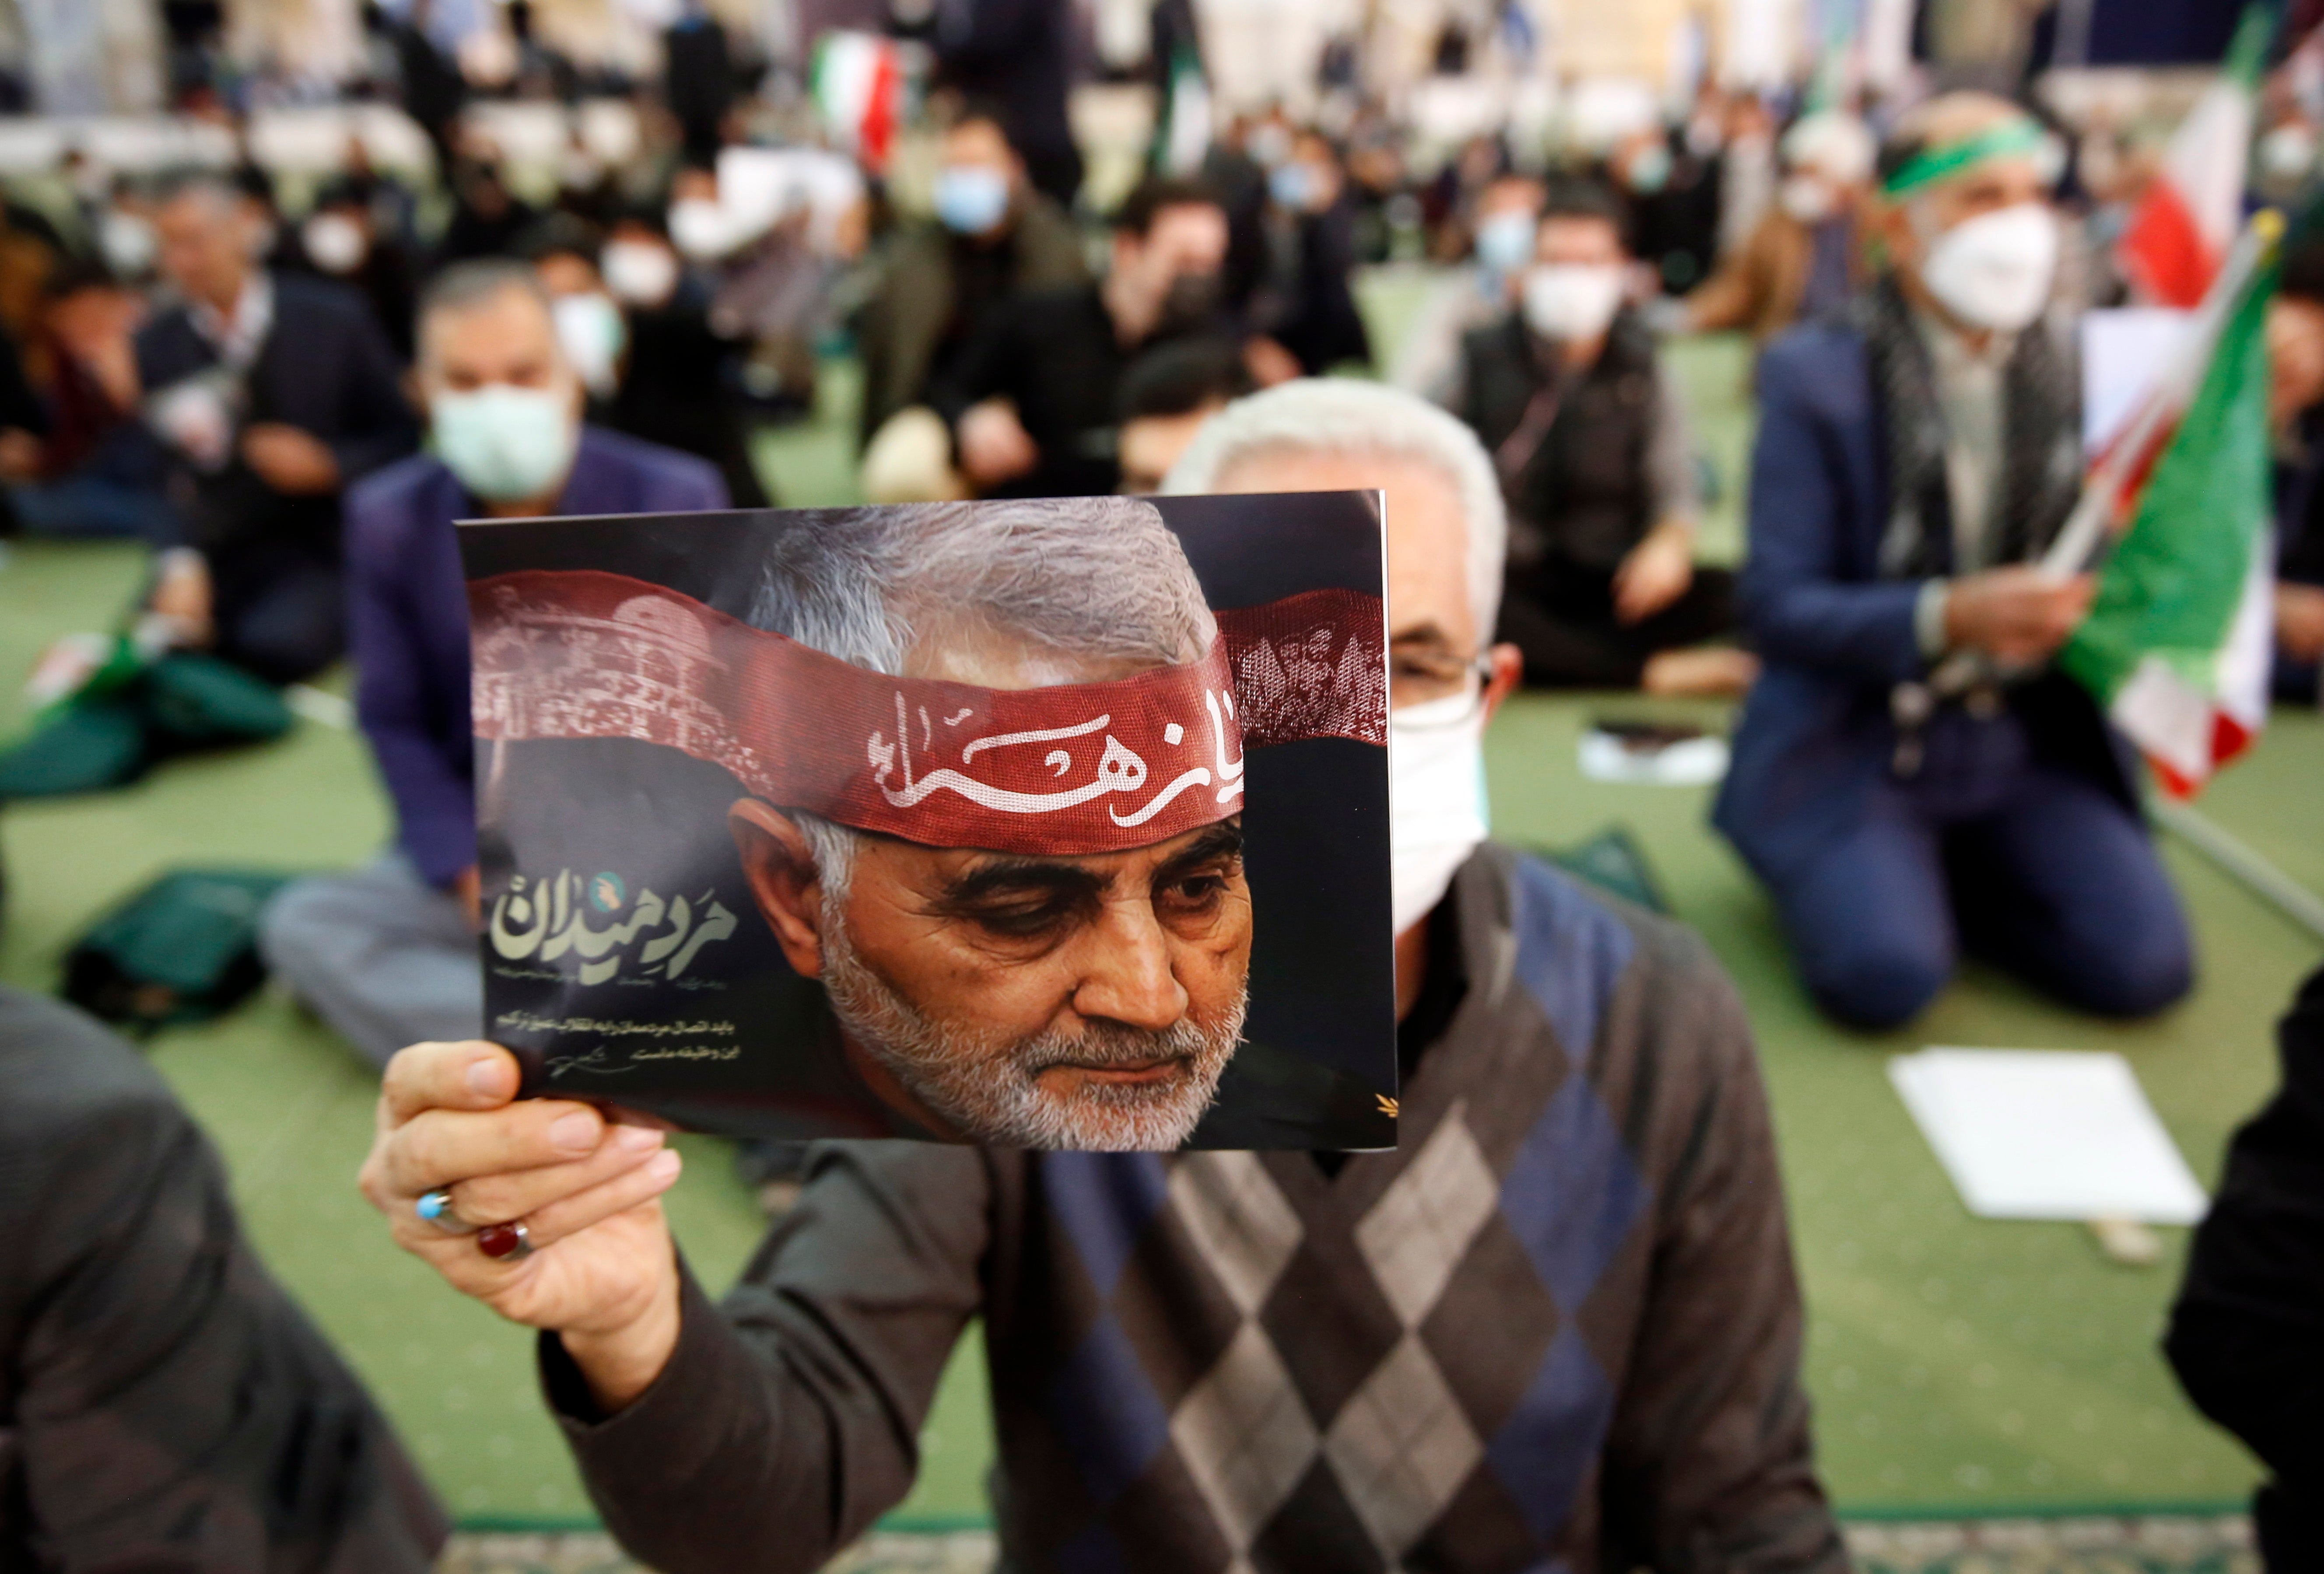 Iranians hold pictures of Qasem Soleimani during a ceremony marking the second anniversary of the death of the Iranian Revolutionary Guards Corps’ lieutenant general and commander